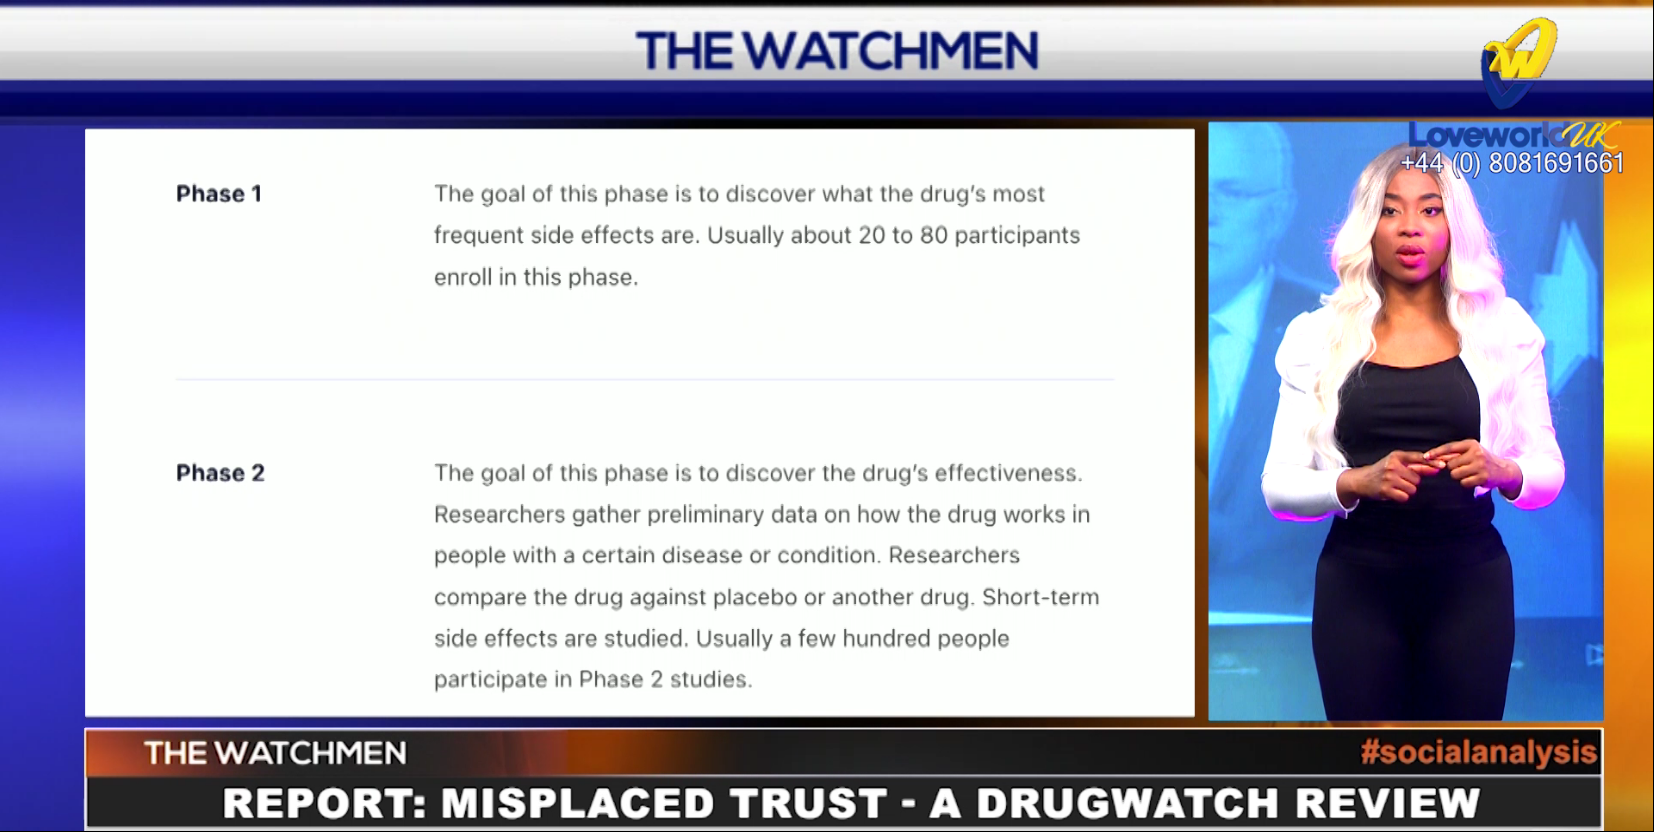 THE WATCHMEN_EP53: WHY FDA APPROVAL DOESN'T GUARANTEE SAFETY (PART 1)